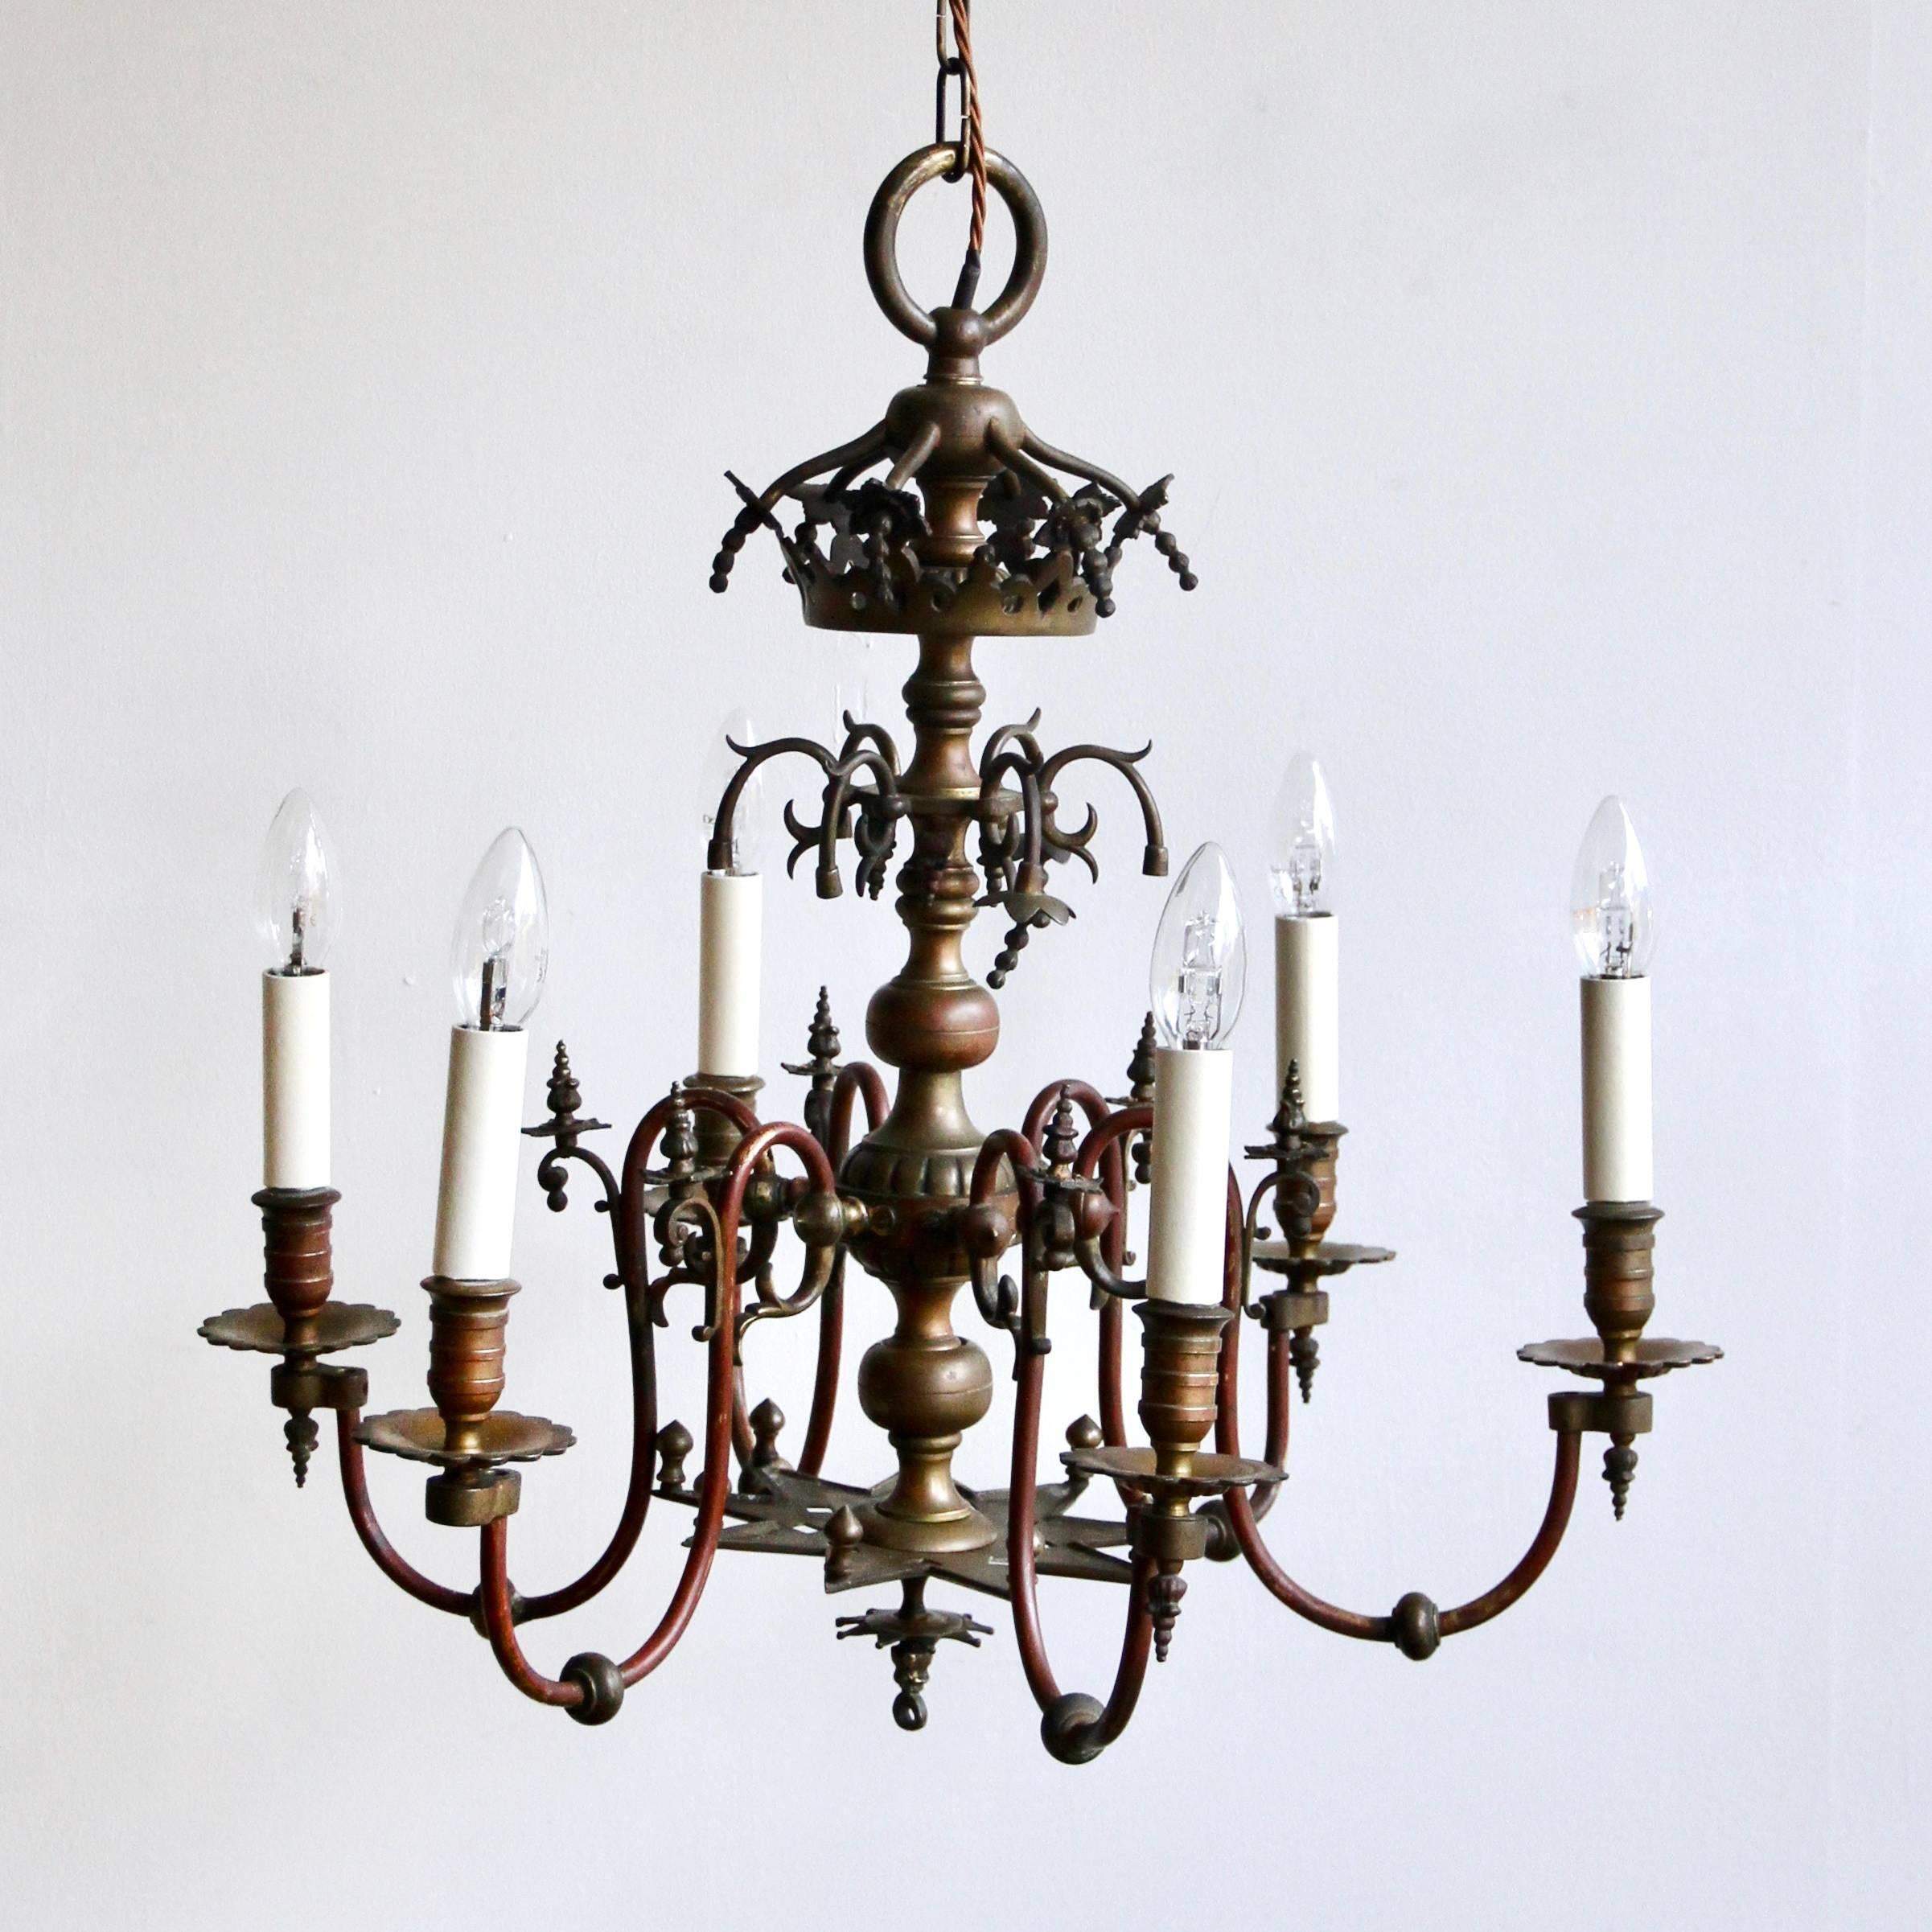 European Mid-19th Century Electrified Gasolier Chandelier For Sale